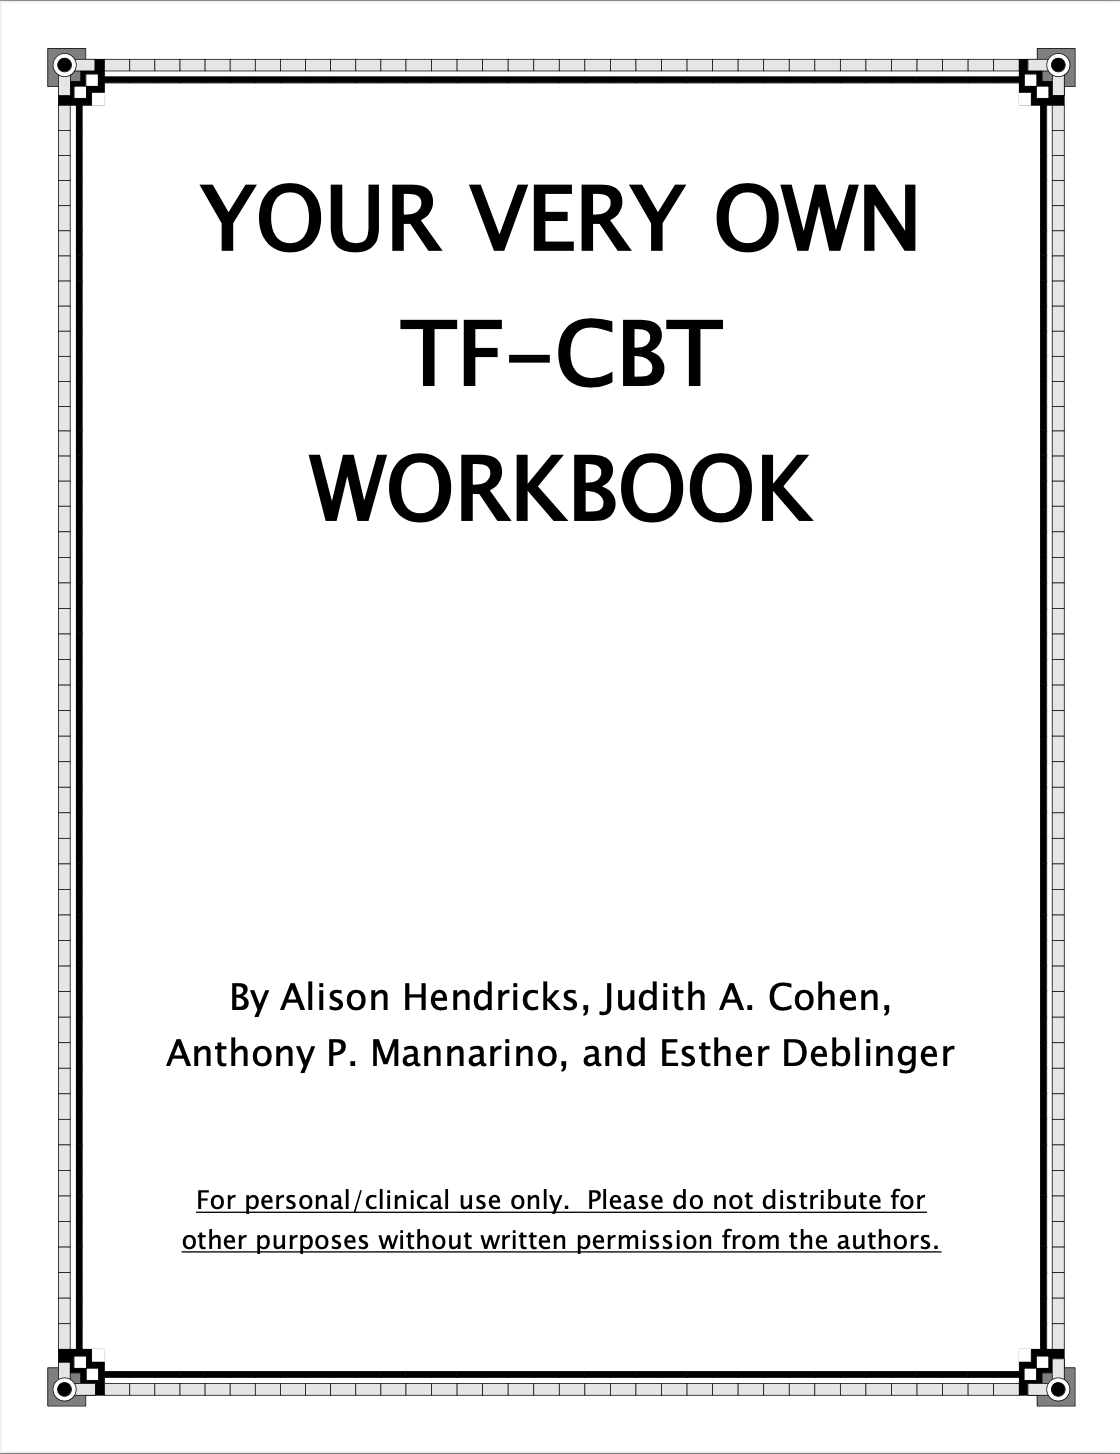 Dealing with Grief - A TF-CBT Workbook for Teens Final